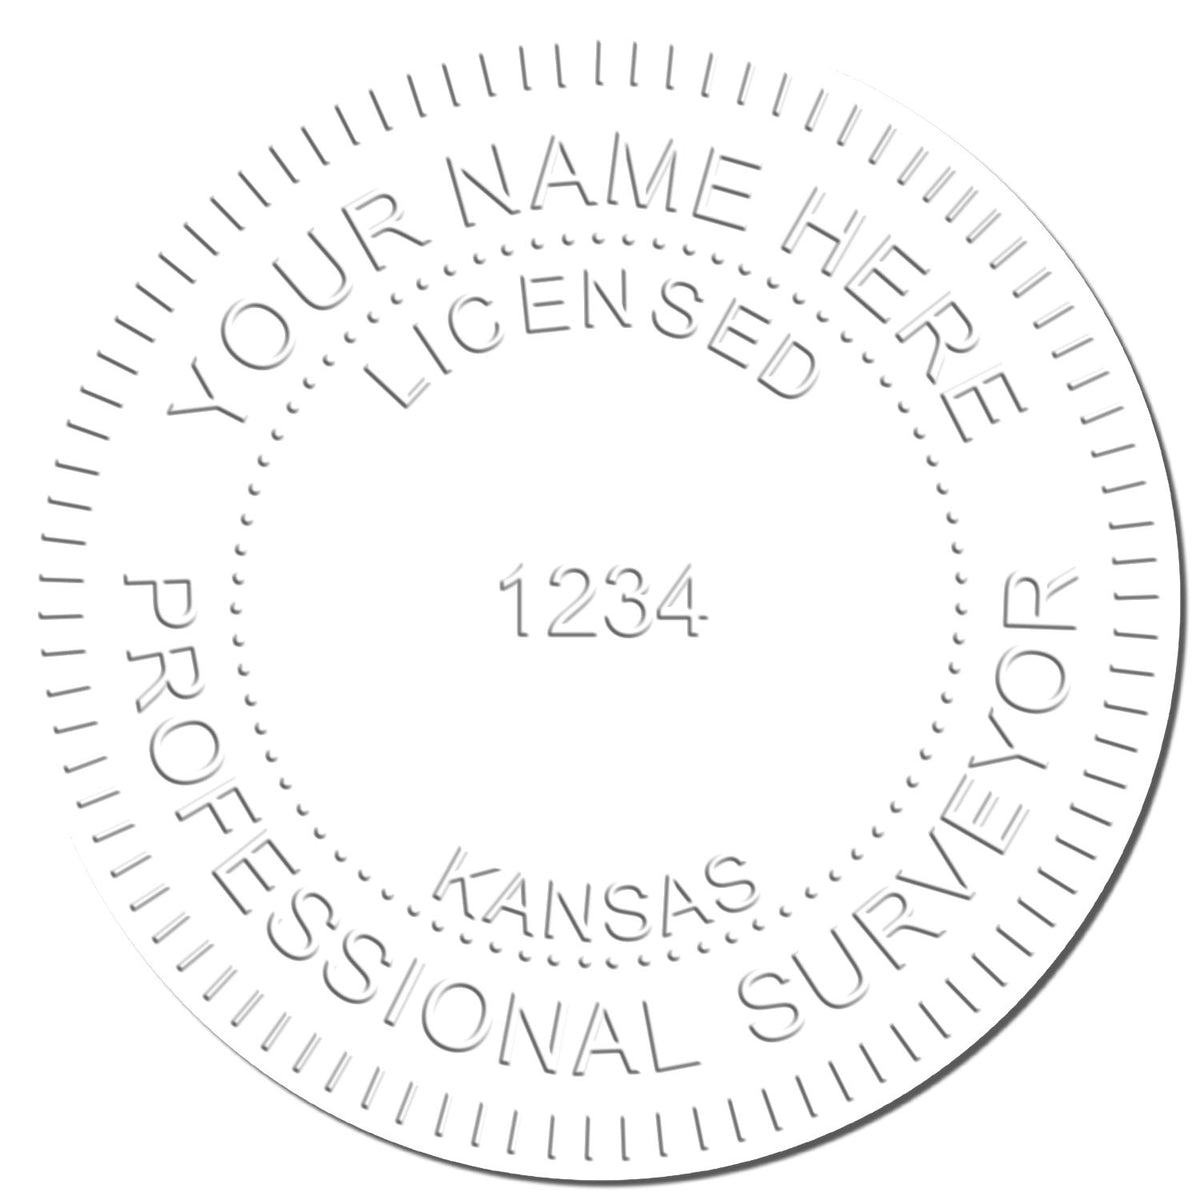 This paper is stamped with a sample imprint of the Handheld Kansas Land Surveyor Seal, signifying its quality and reliability.